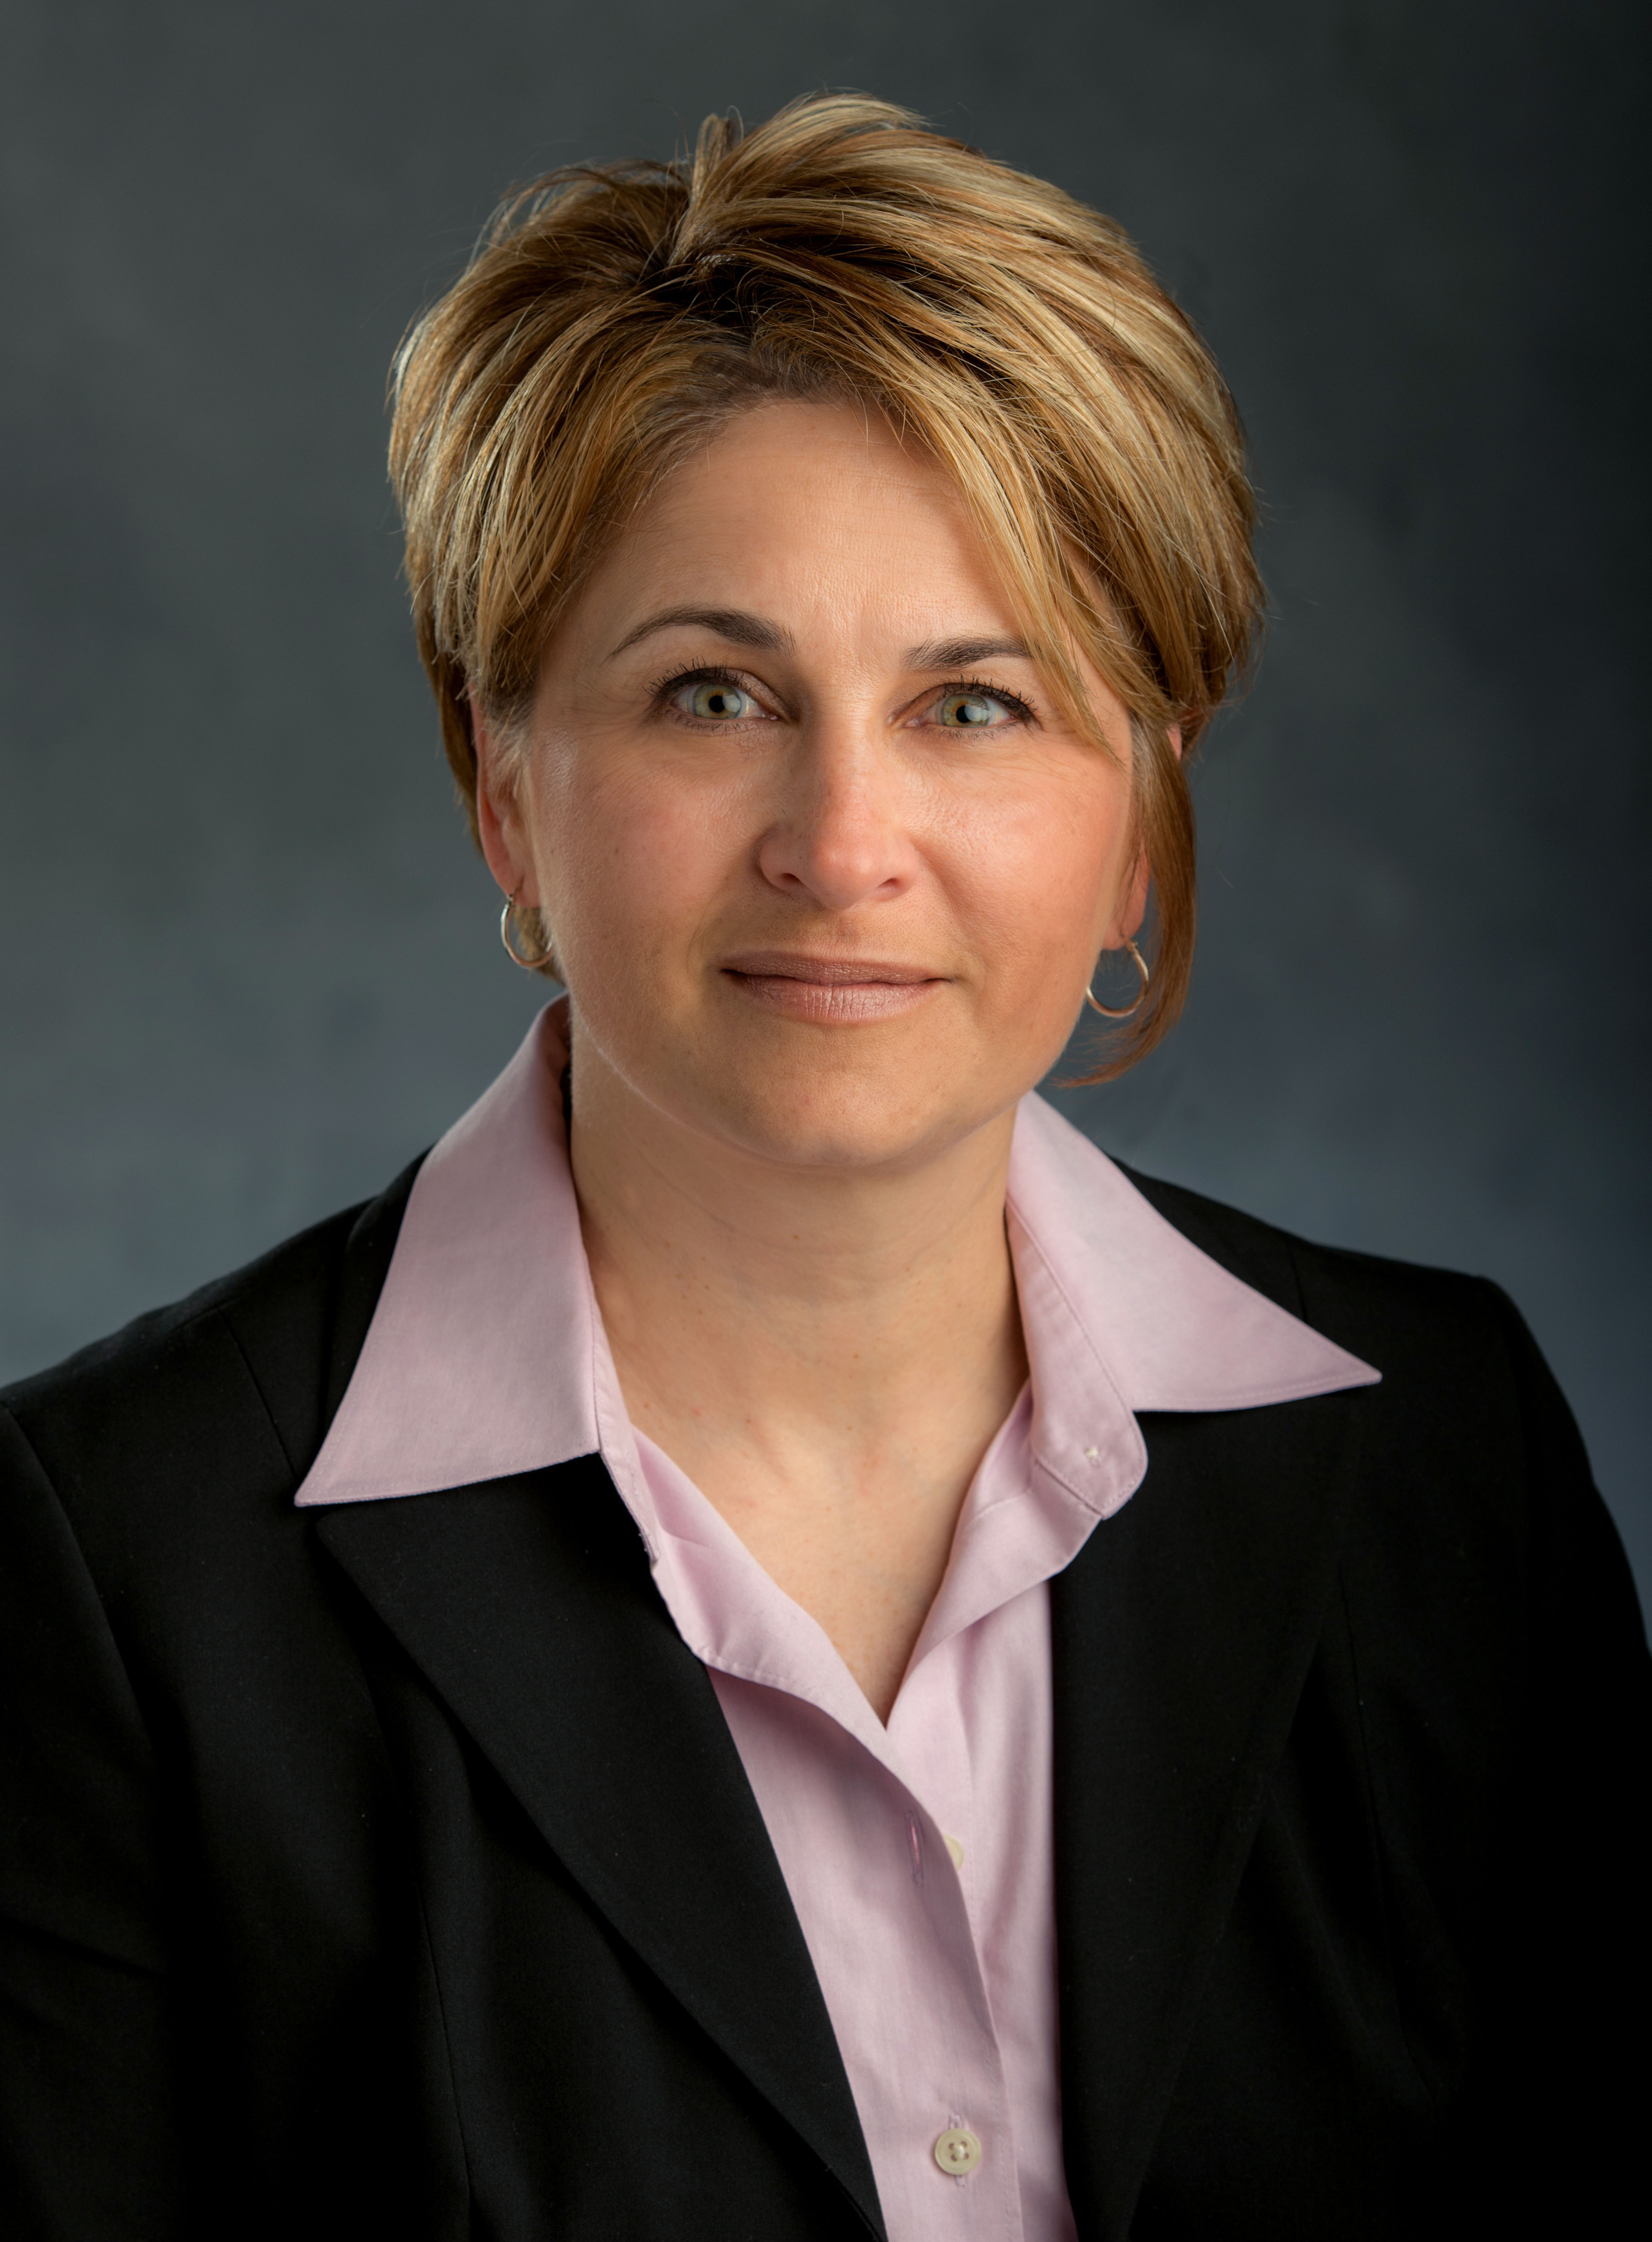 Kelly Millenbah, dean of Michigan State University's College of Agriculture and Natural Resources.